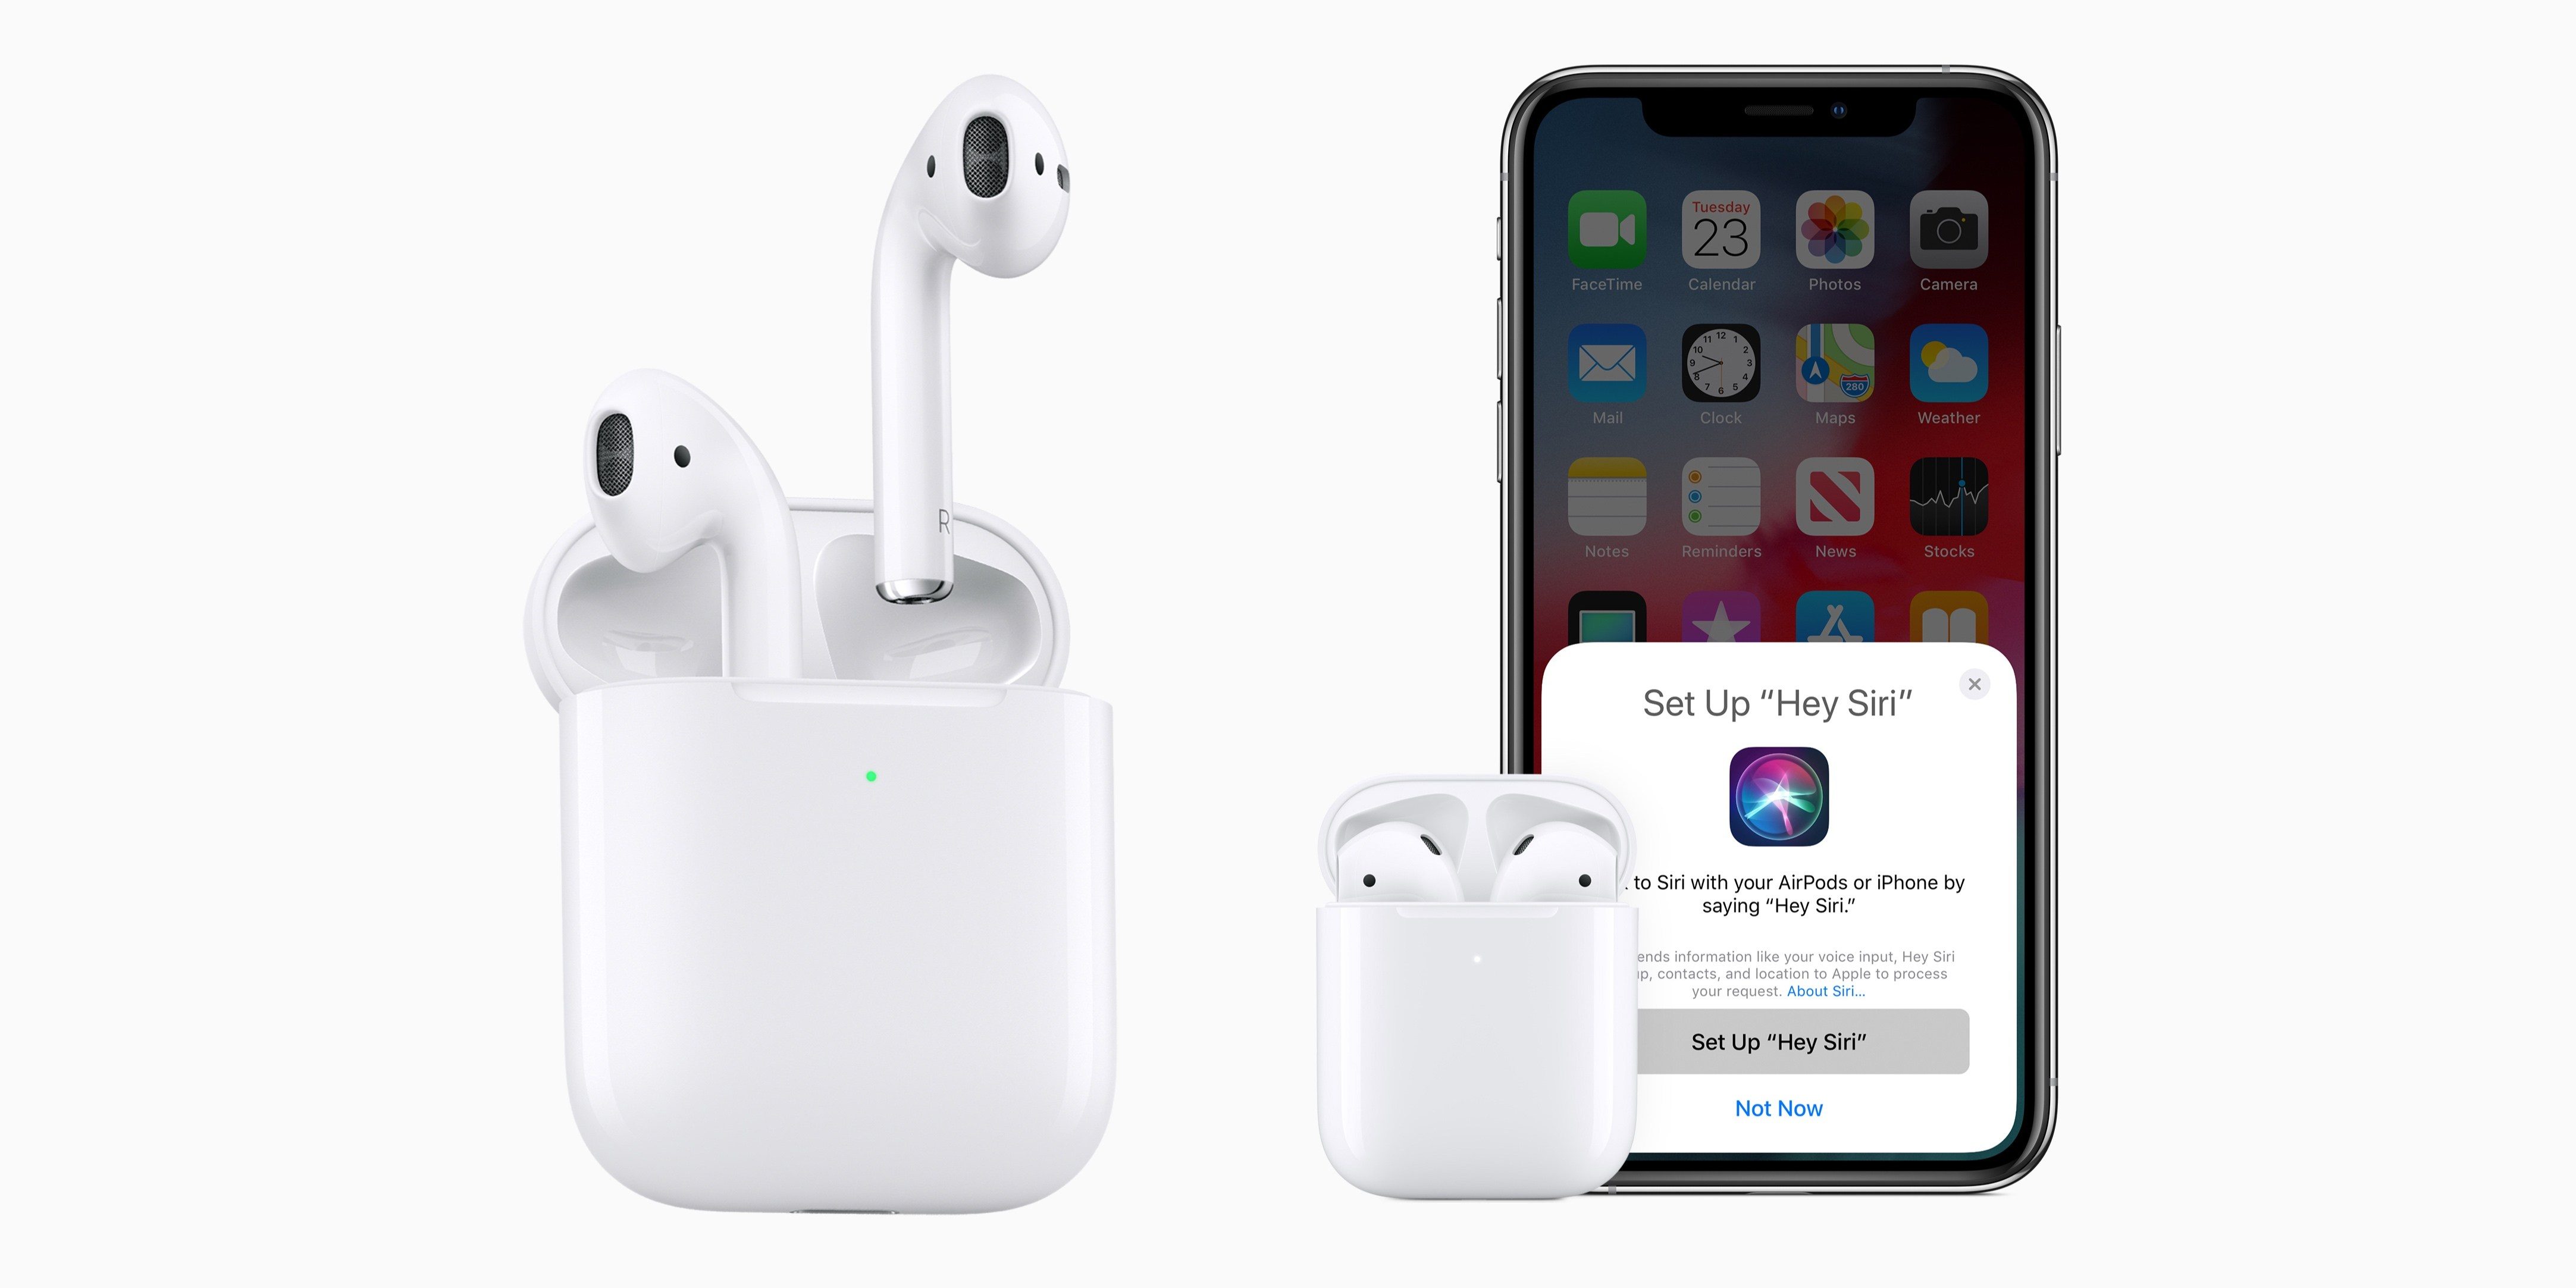 AirPods and AirPods Pro: News, Features, Reviews, Pricing, etc - 9to5Mac